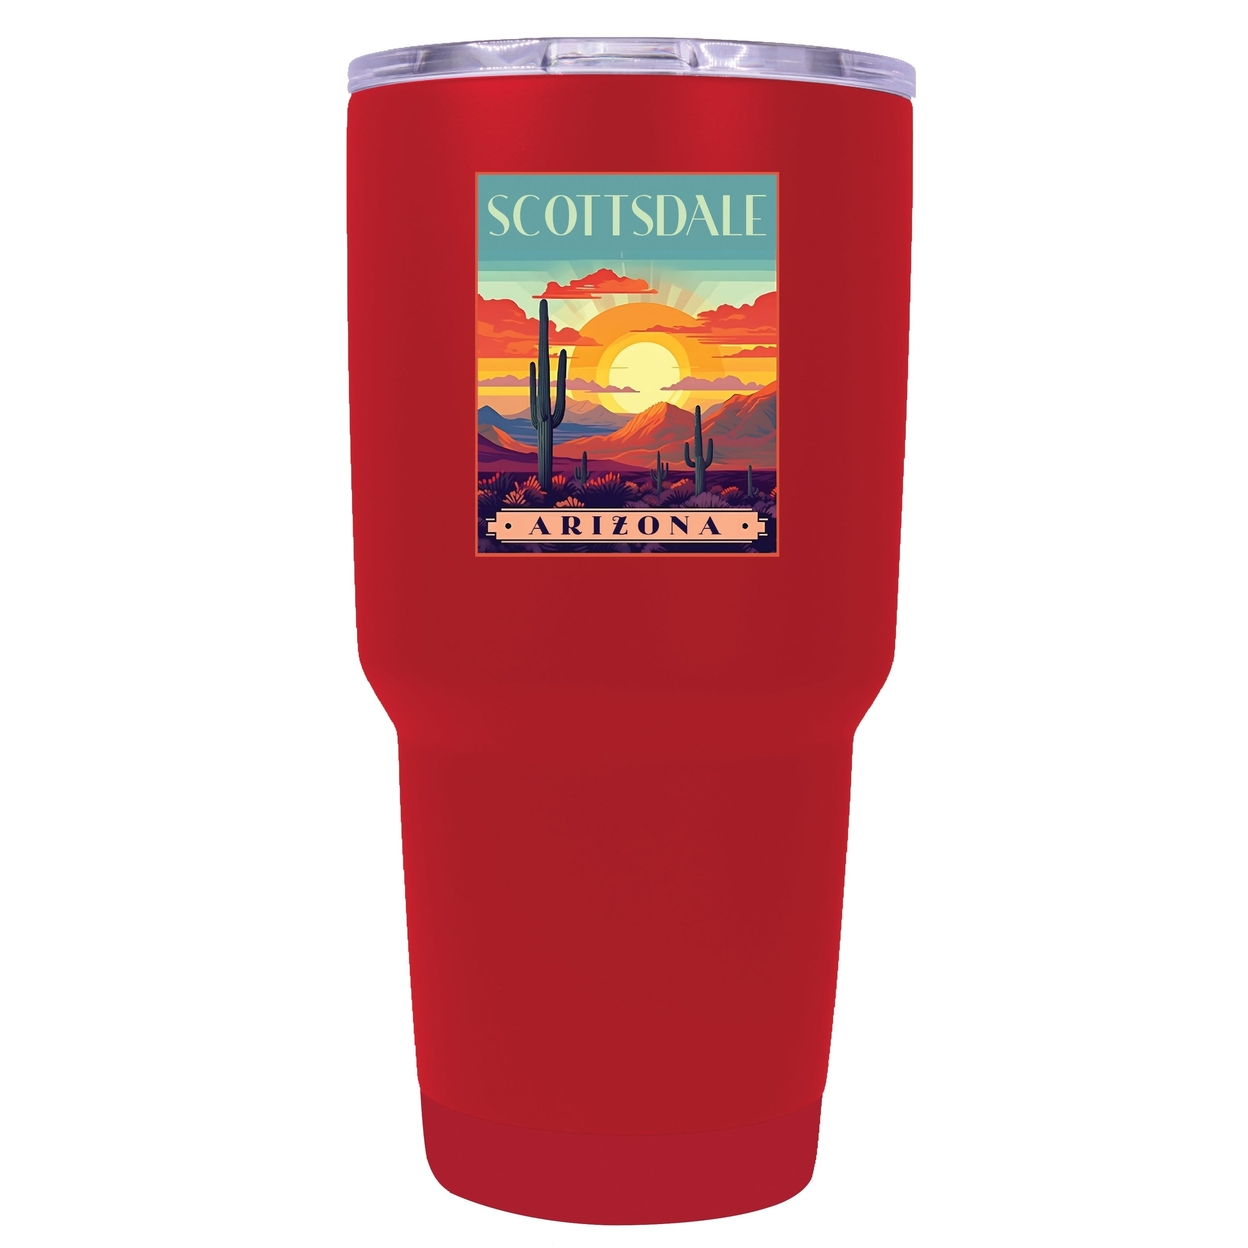 University Of Louisiana Monroe 24 Oz Laser Engraved Stainless Steel Insulated Tumbler - Choose Your Color. - Seafoam,,Single